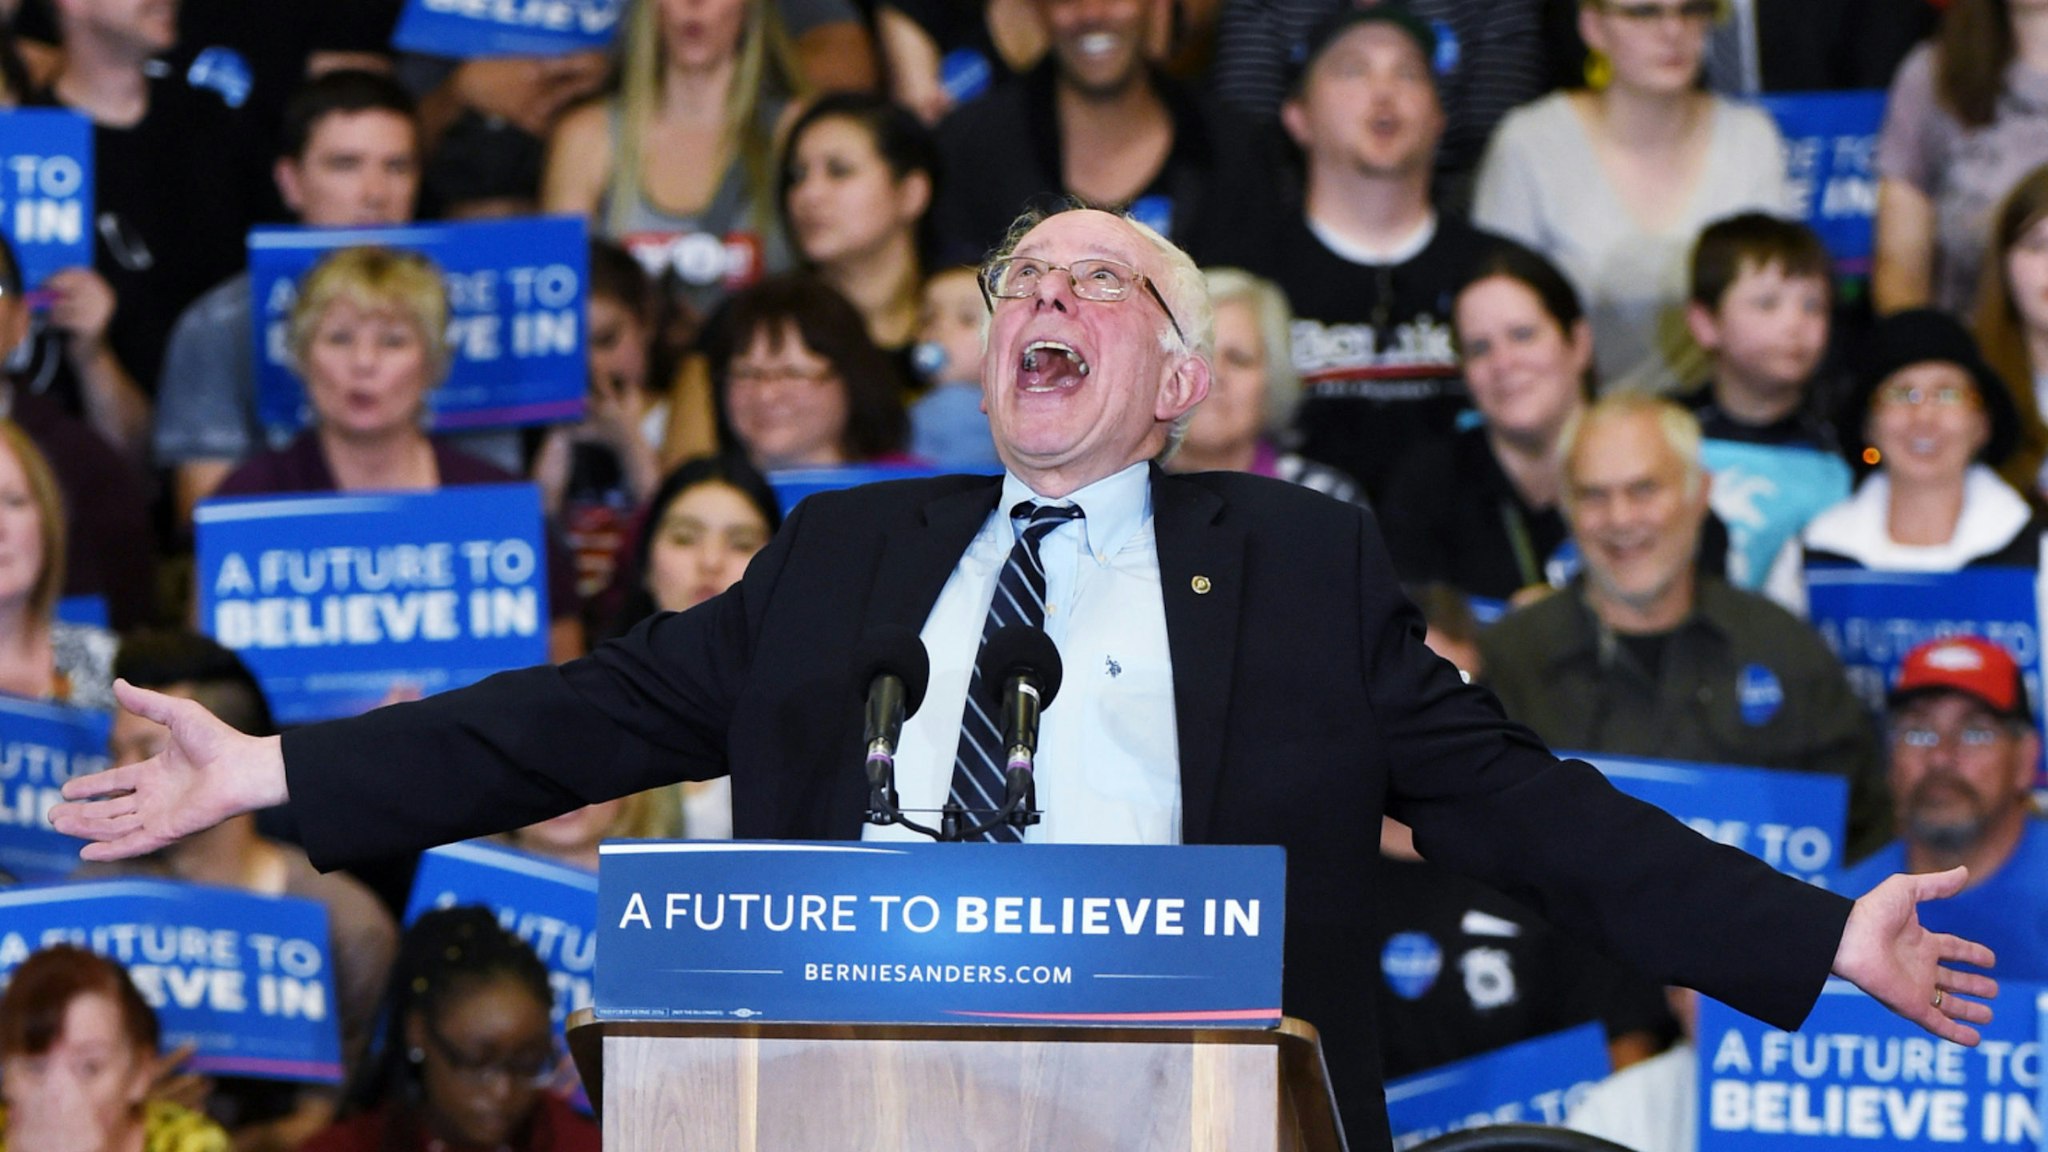 Democratic presidential candidate Sen. Bernie Sanders (D-VT) jokes around as he speaks during a campaign rally at Bonanza High School on February 14, 2016 in Las Vegas, Nevada.